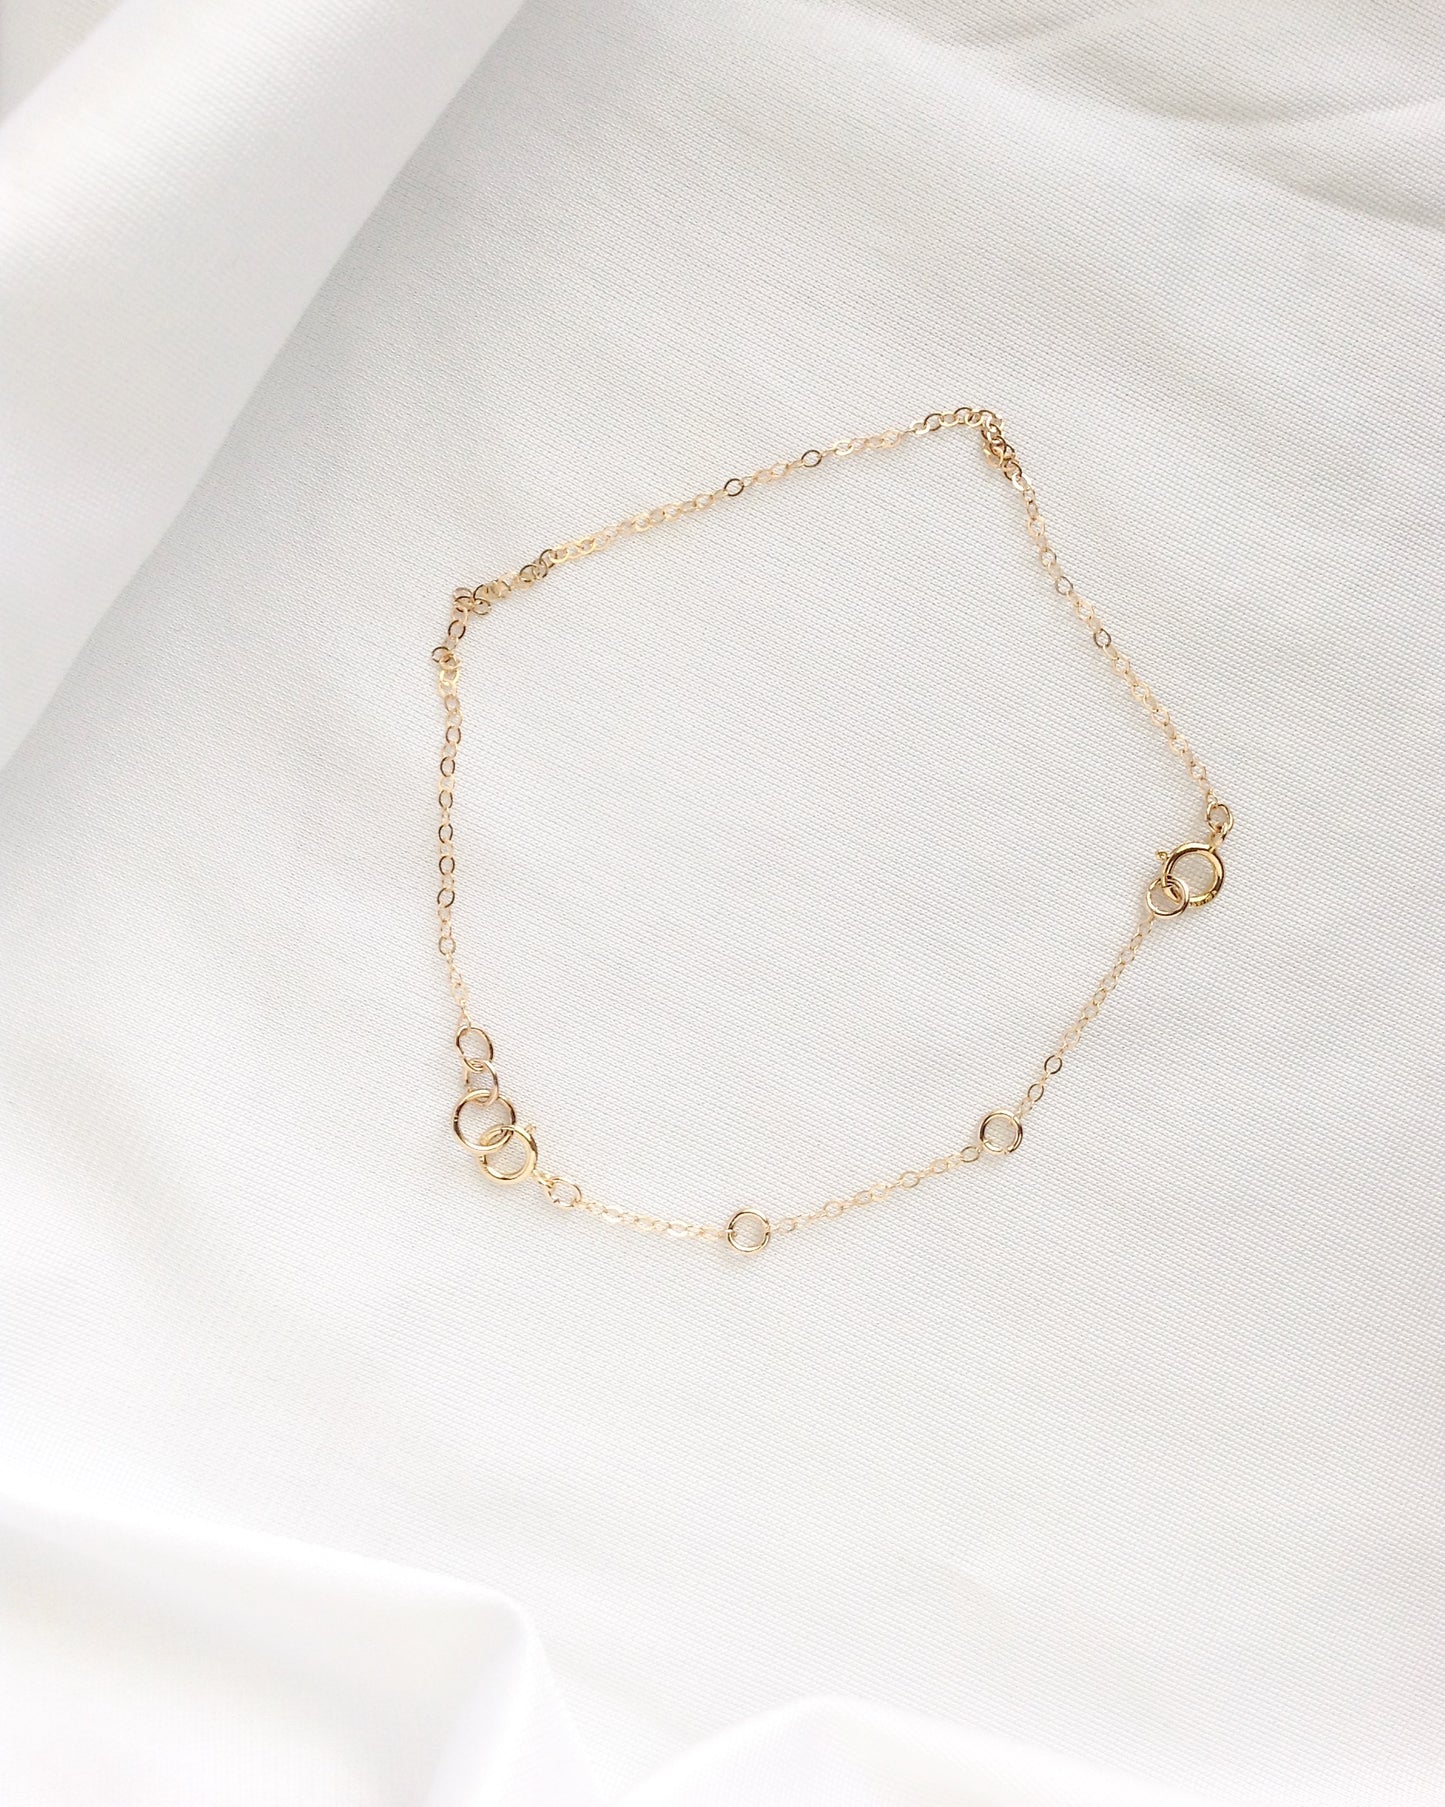 Chain Extender For Necklace Bracelet or Anklet in Sterling Silver or Gold Filled | IB. Jewelry